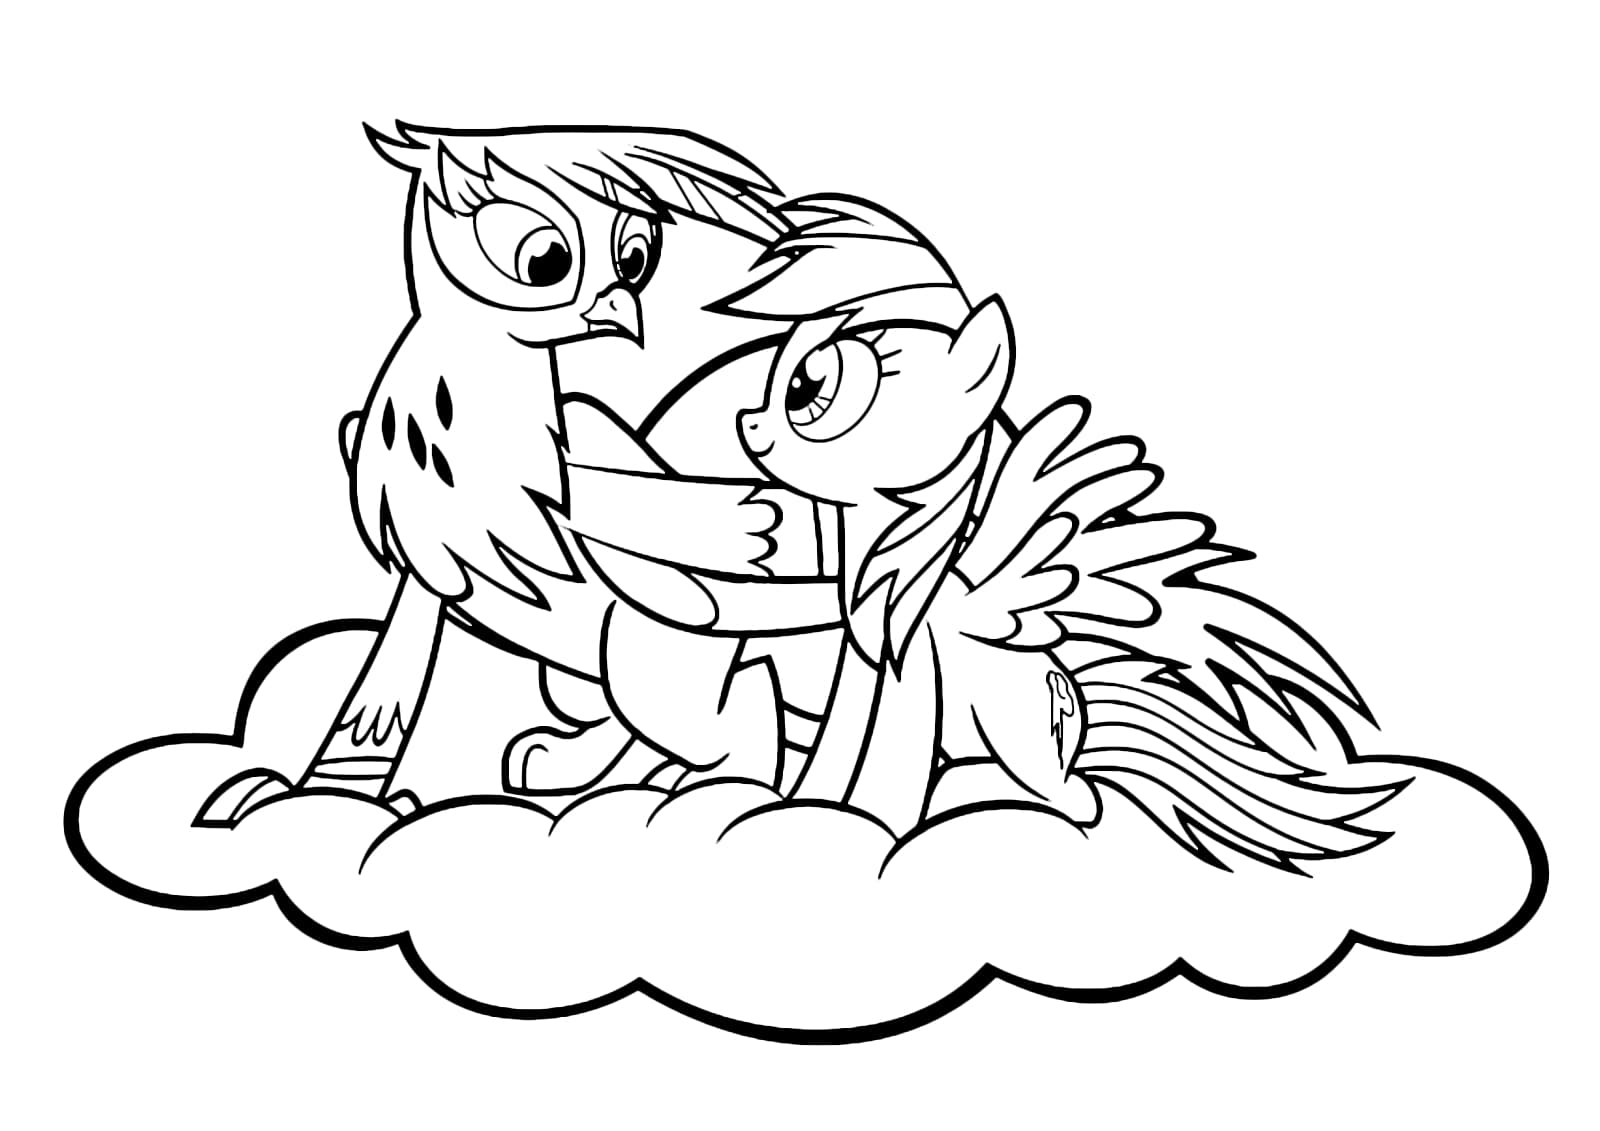 The Griffon Gilda on a cloud Coloring Pages